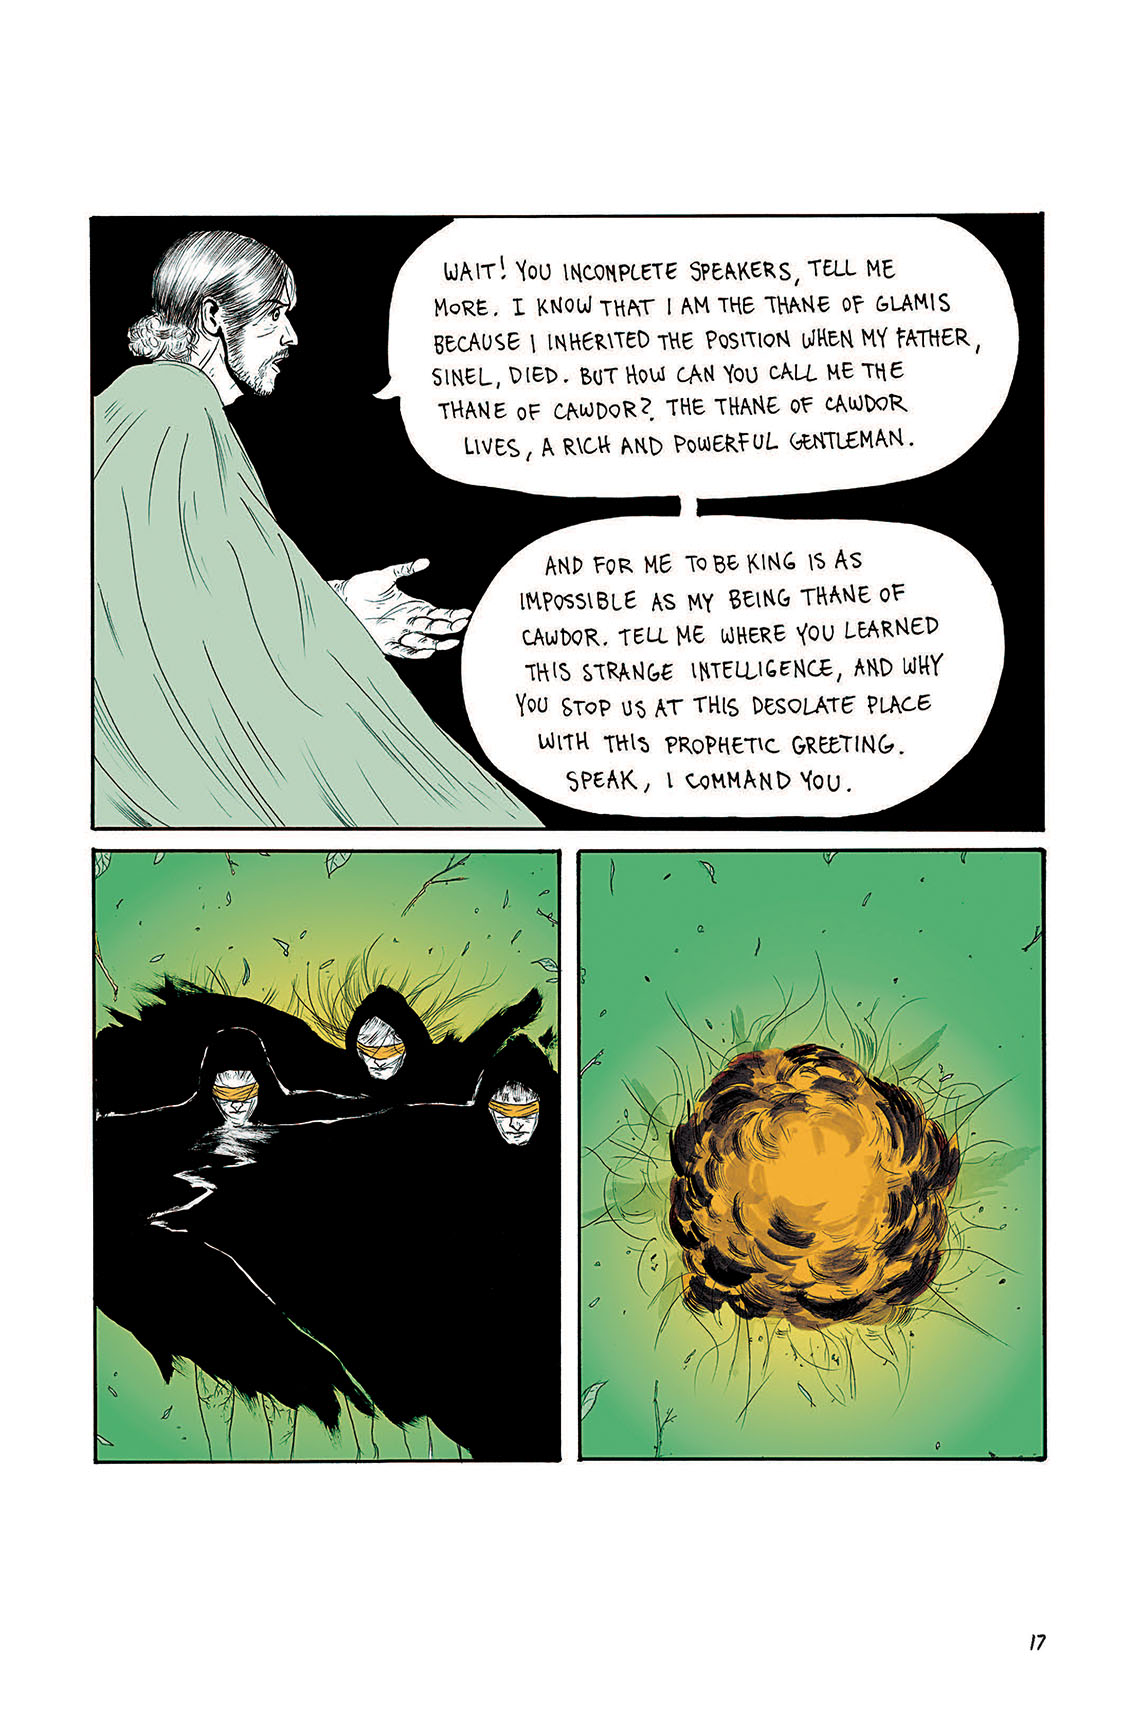 Macbeth Act 1 Scene 3 Page 17 Graphic Novel SparkNotes